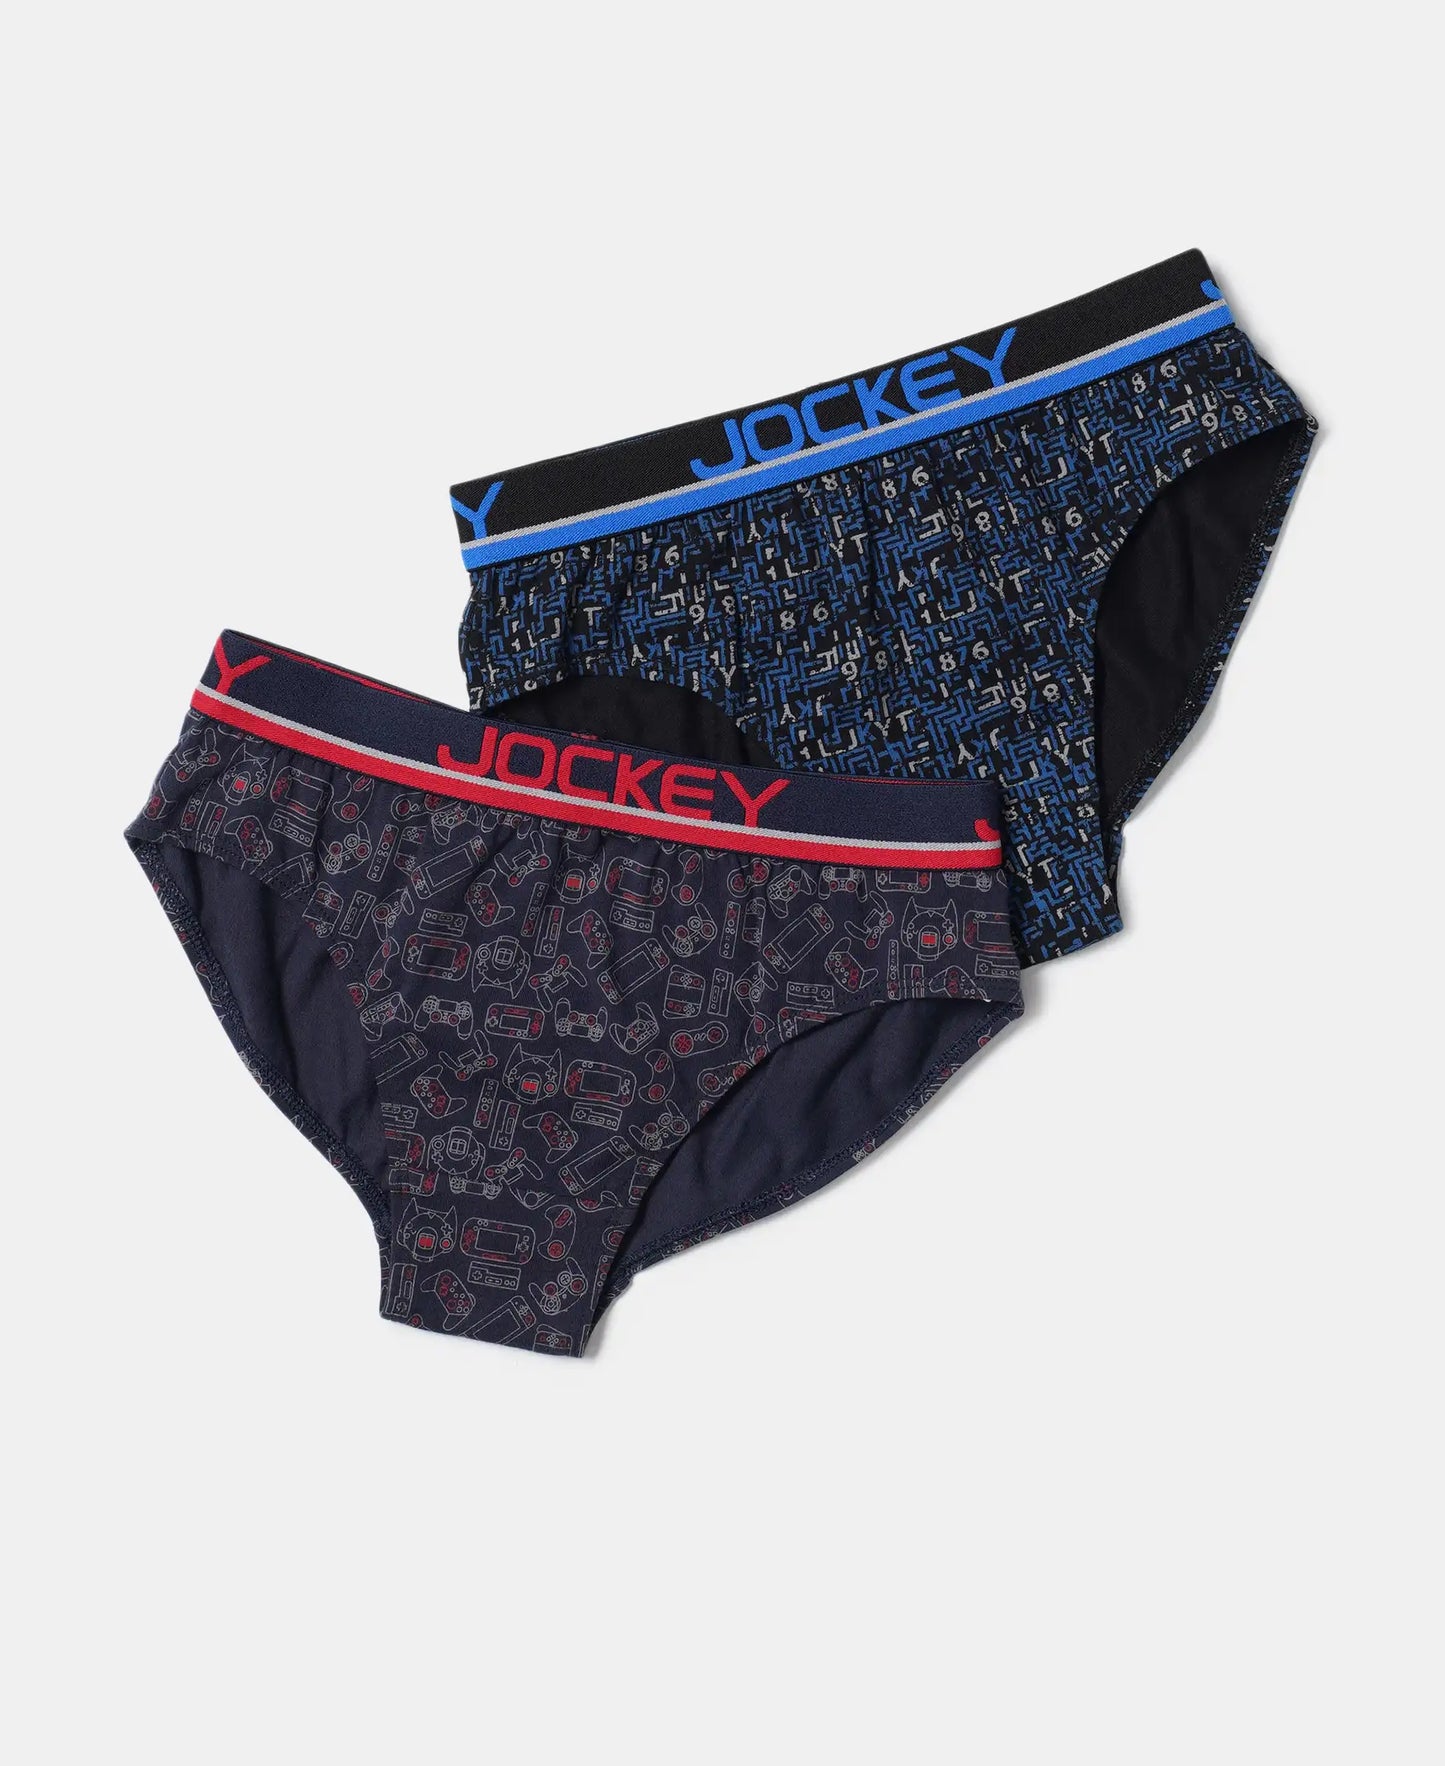 Super Combed Cotton Elastane Printed Brief with Ultrasoft Waistband - Assorted Color & Prints-10